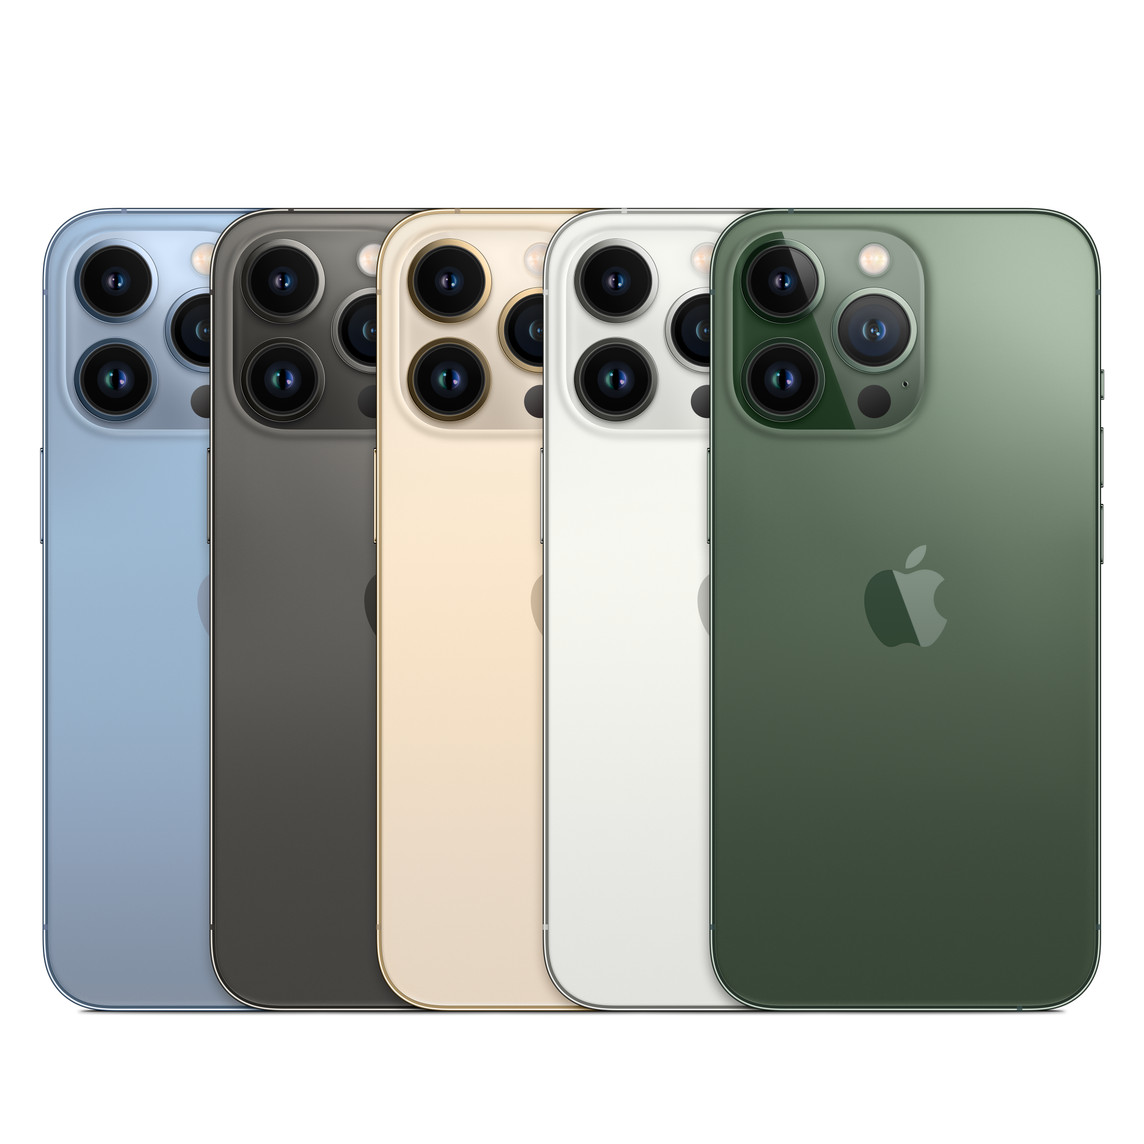 Apple Certified Refurbished iPhone 13, iPhone 13 Pro & iPhone 13 Pro Max starting at $619